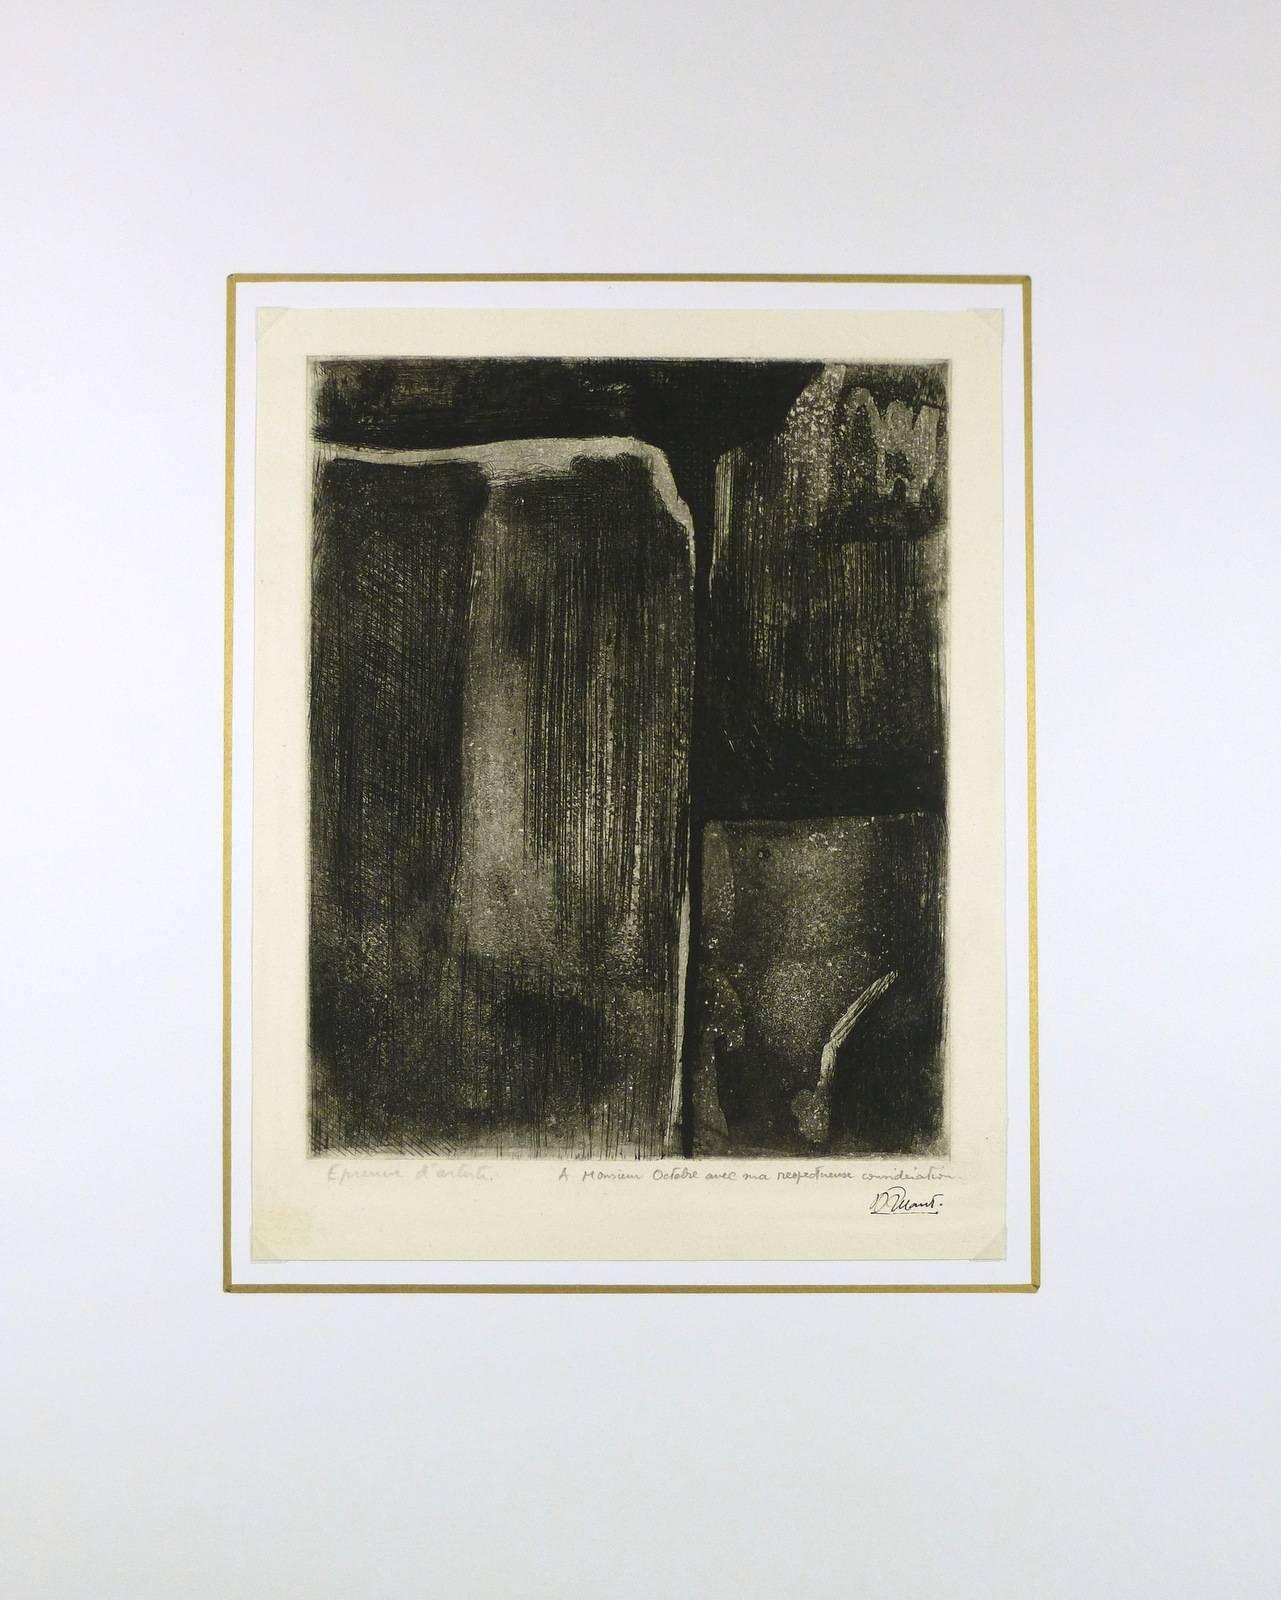 Dynamic black toned abstract etching artist proof by French artist D. Mons, circa 1990. Signed lower right.  

Original artwork on paper displayed on a white mat with a gold border. Mat fits a standard-size frame.  Archival plastic sleeve and